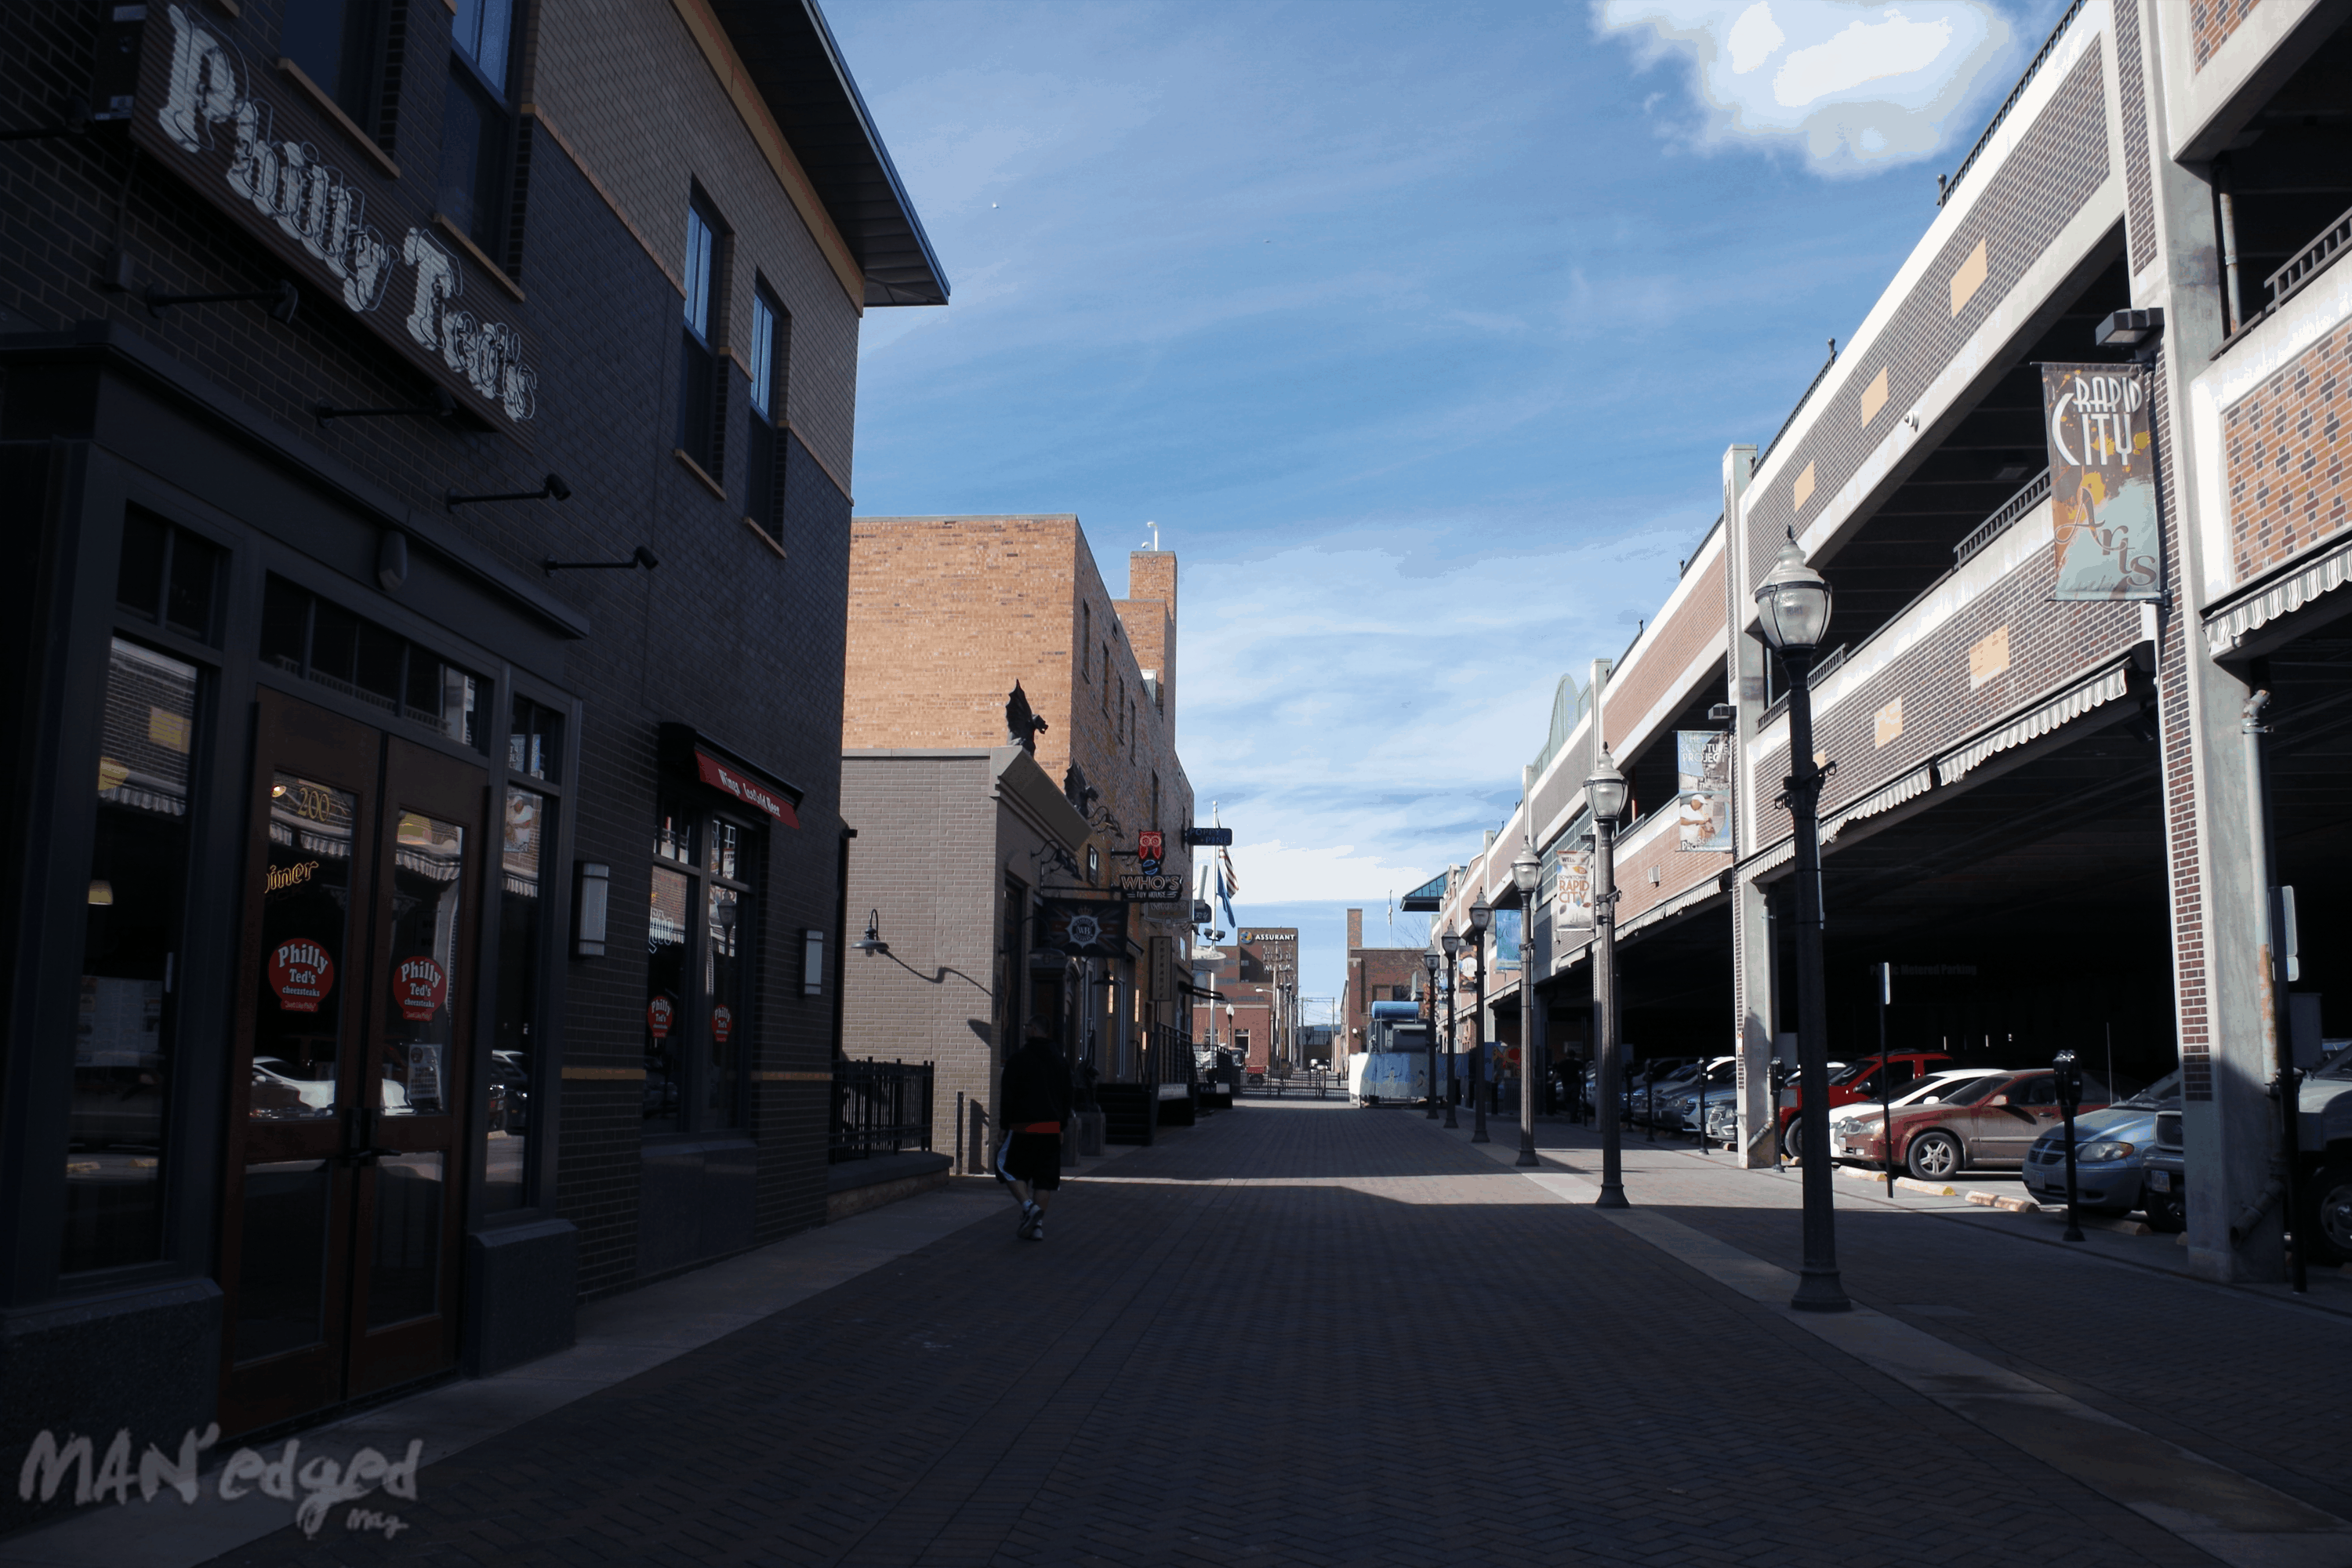 A shot of downtown Rapid City's local shops and eateries.